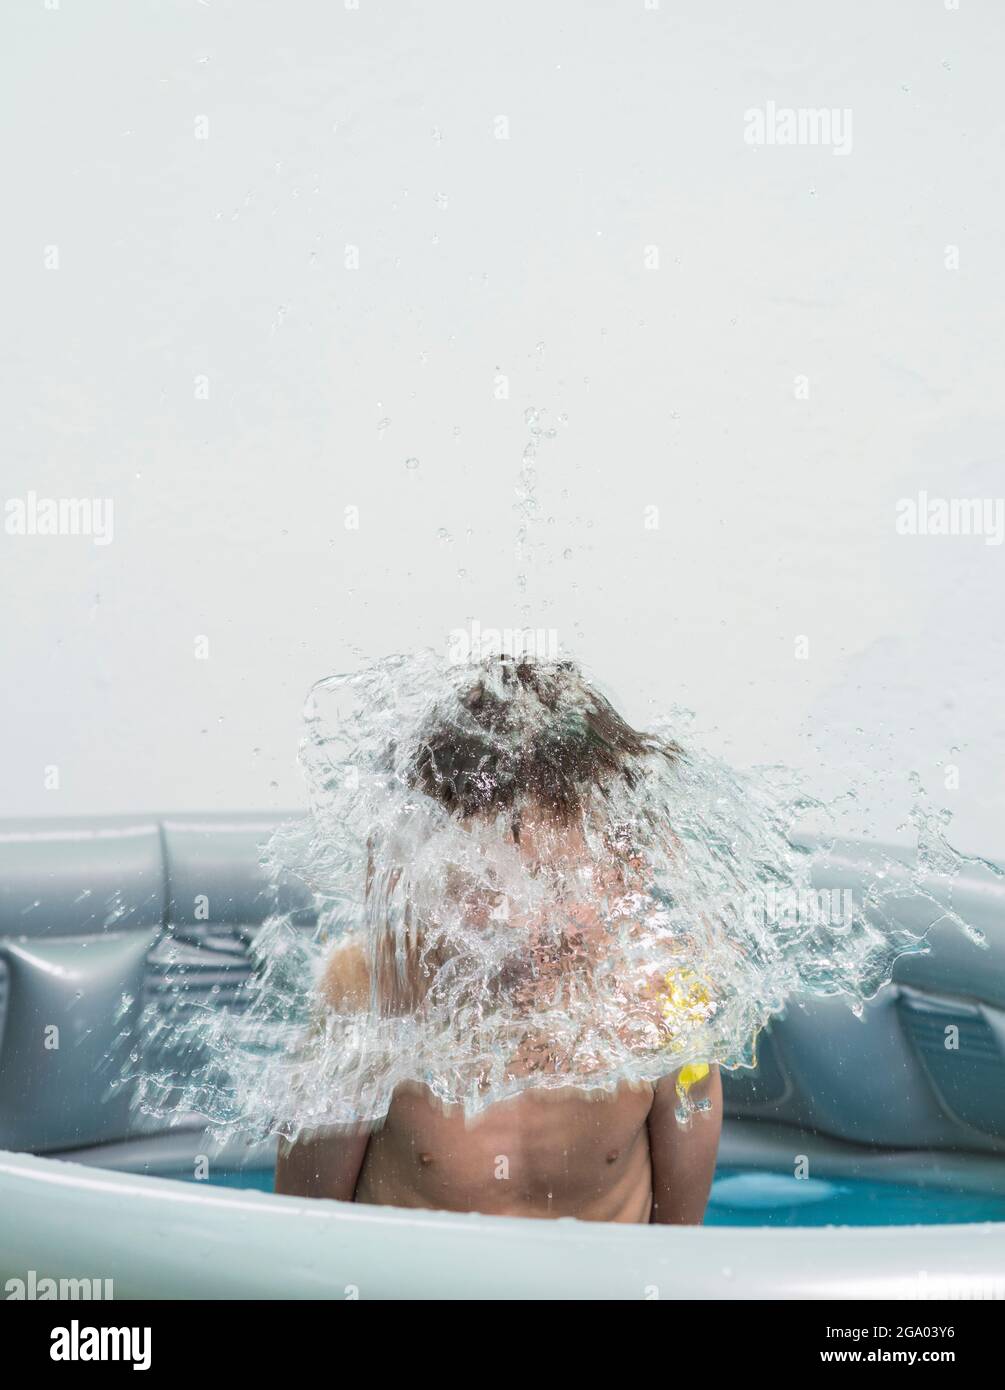 A water balloon exploding over a child's head. Water games are ideal to make the high summer temperatures more bearable. Stock Photo